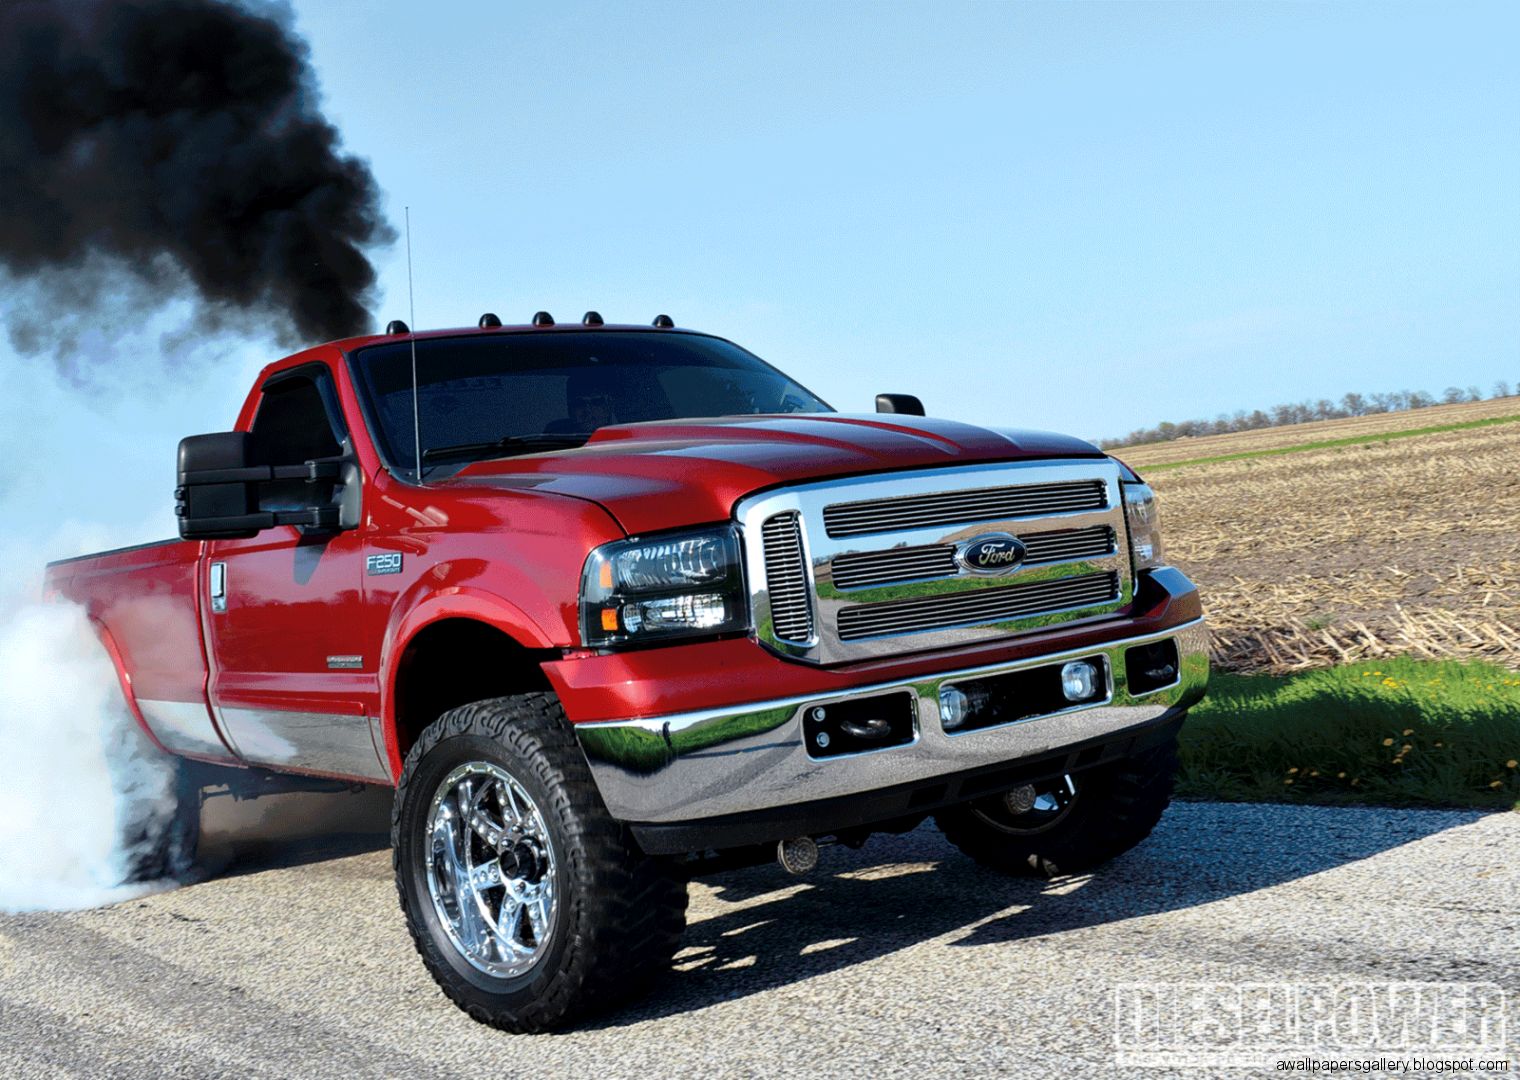 Lifted Trucks With Stacks Rolling Coal | Wallpapers Gallery